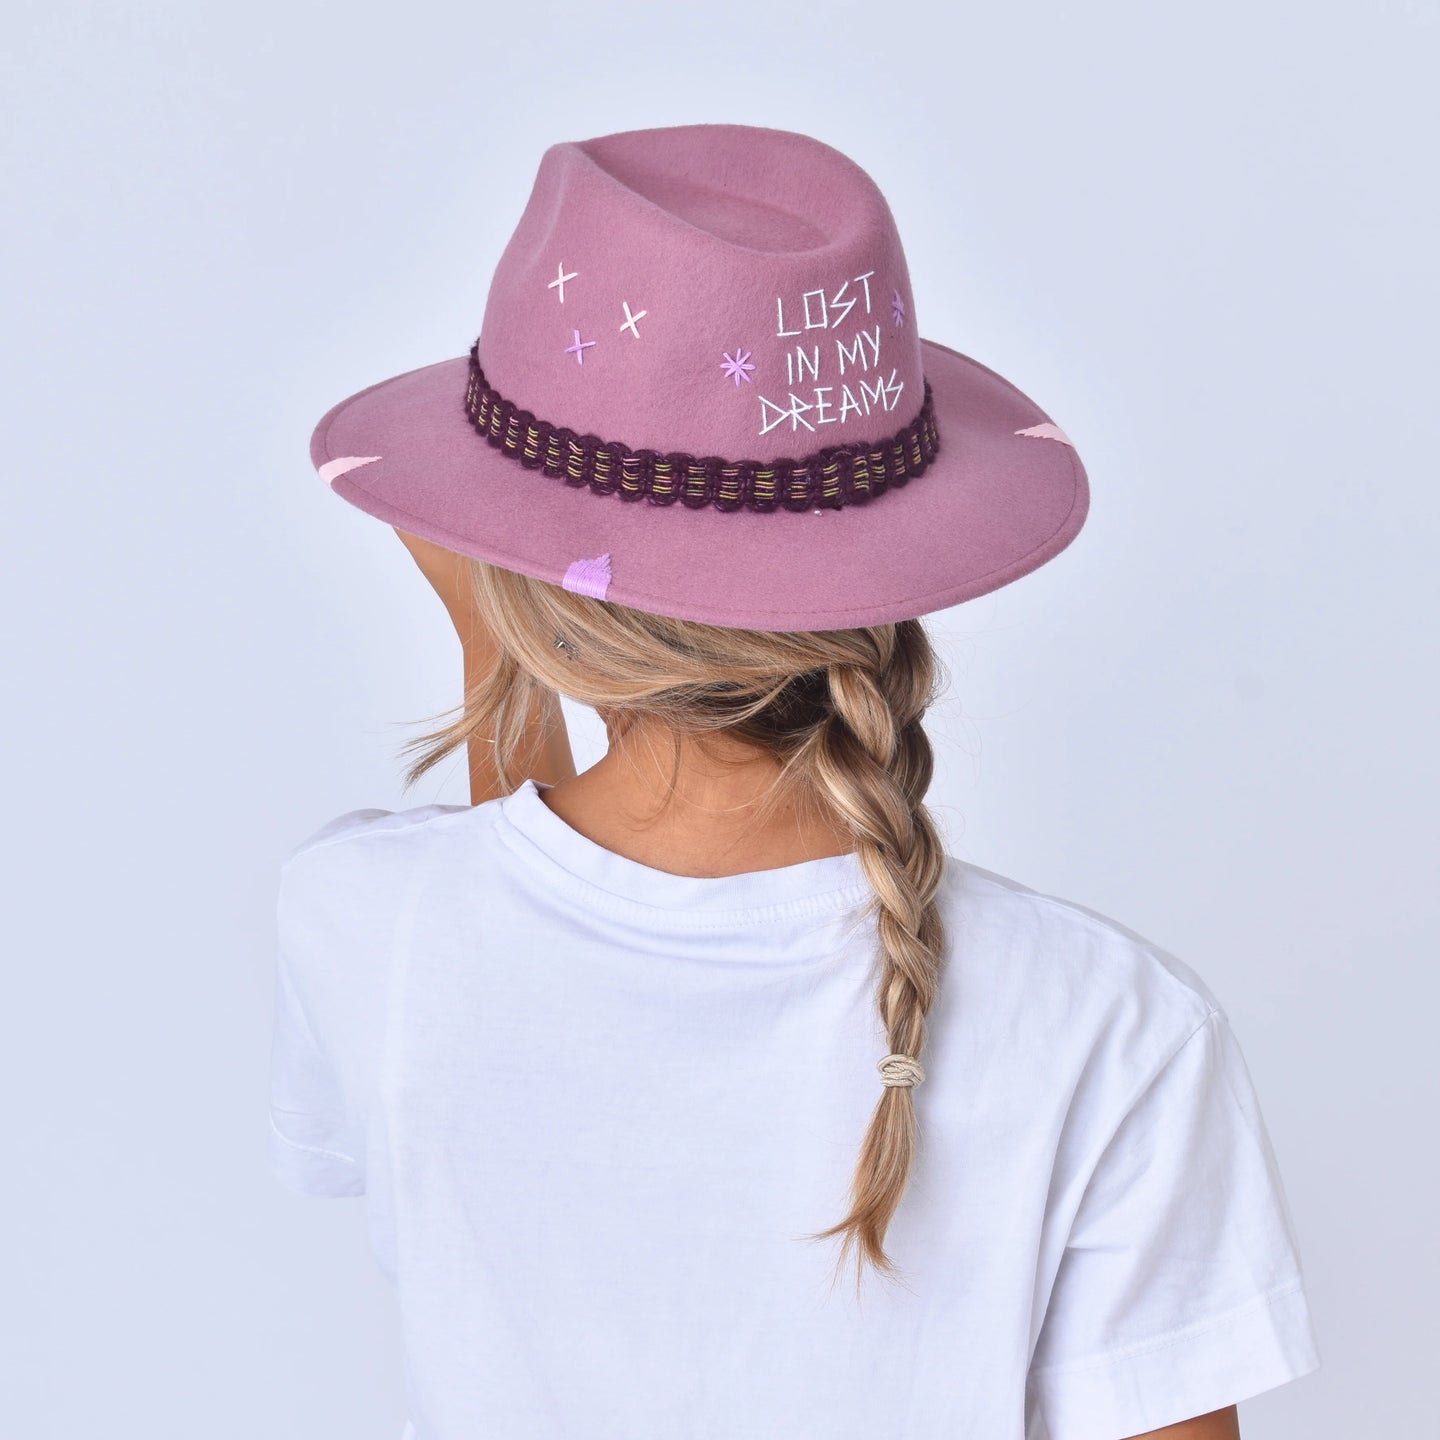 Antique pink hat - LOST IN MY DREAM